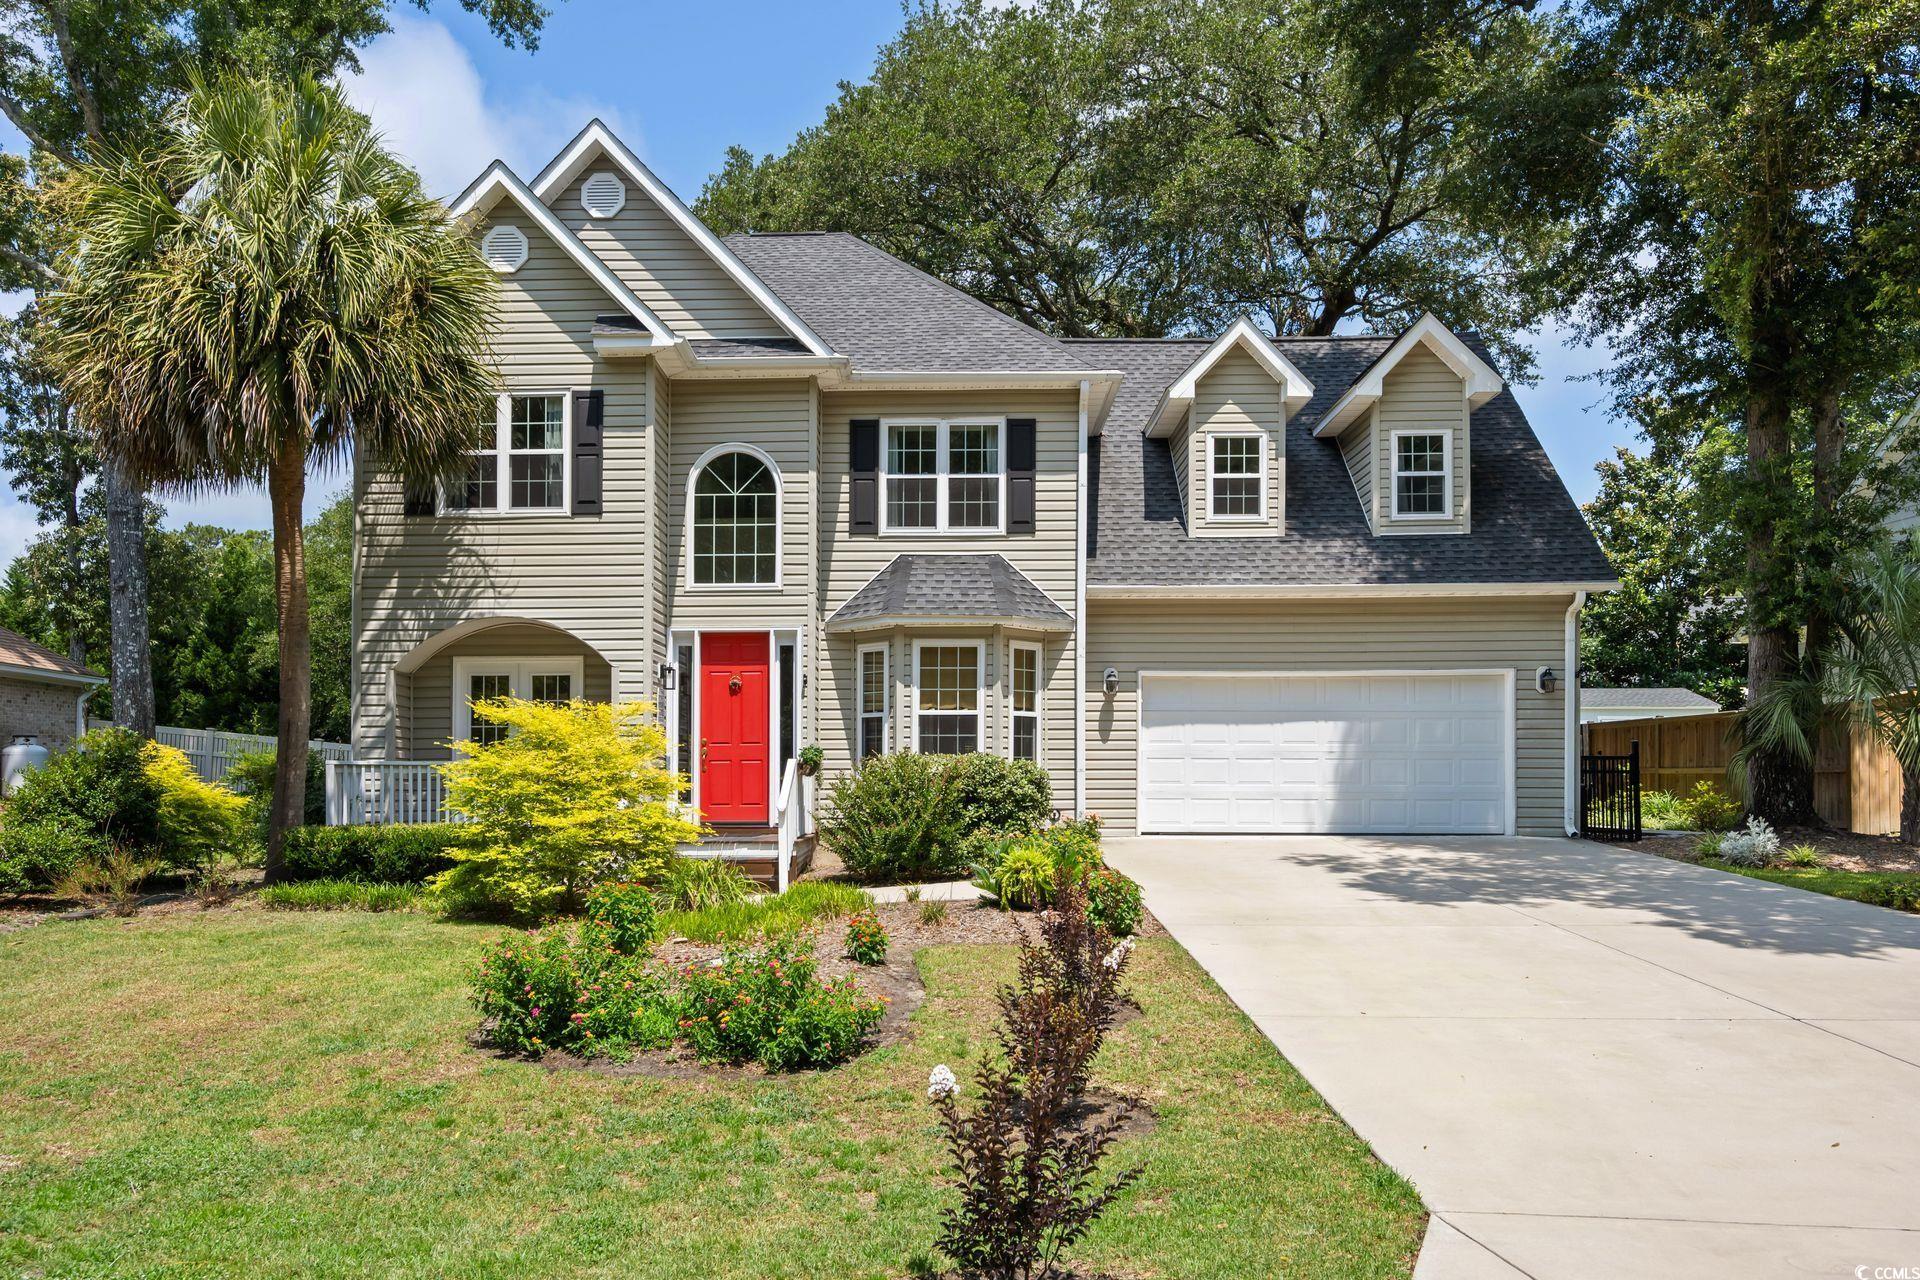 60 Red Maple Dr. Pawleys Island, SC 29585